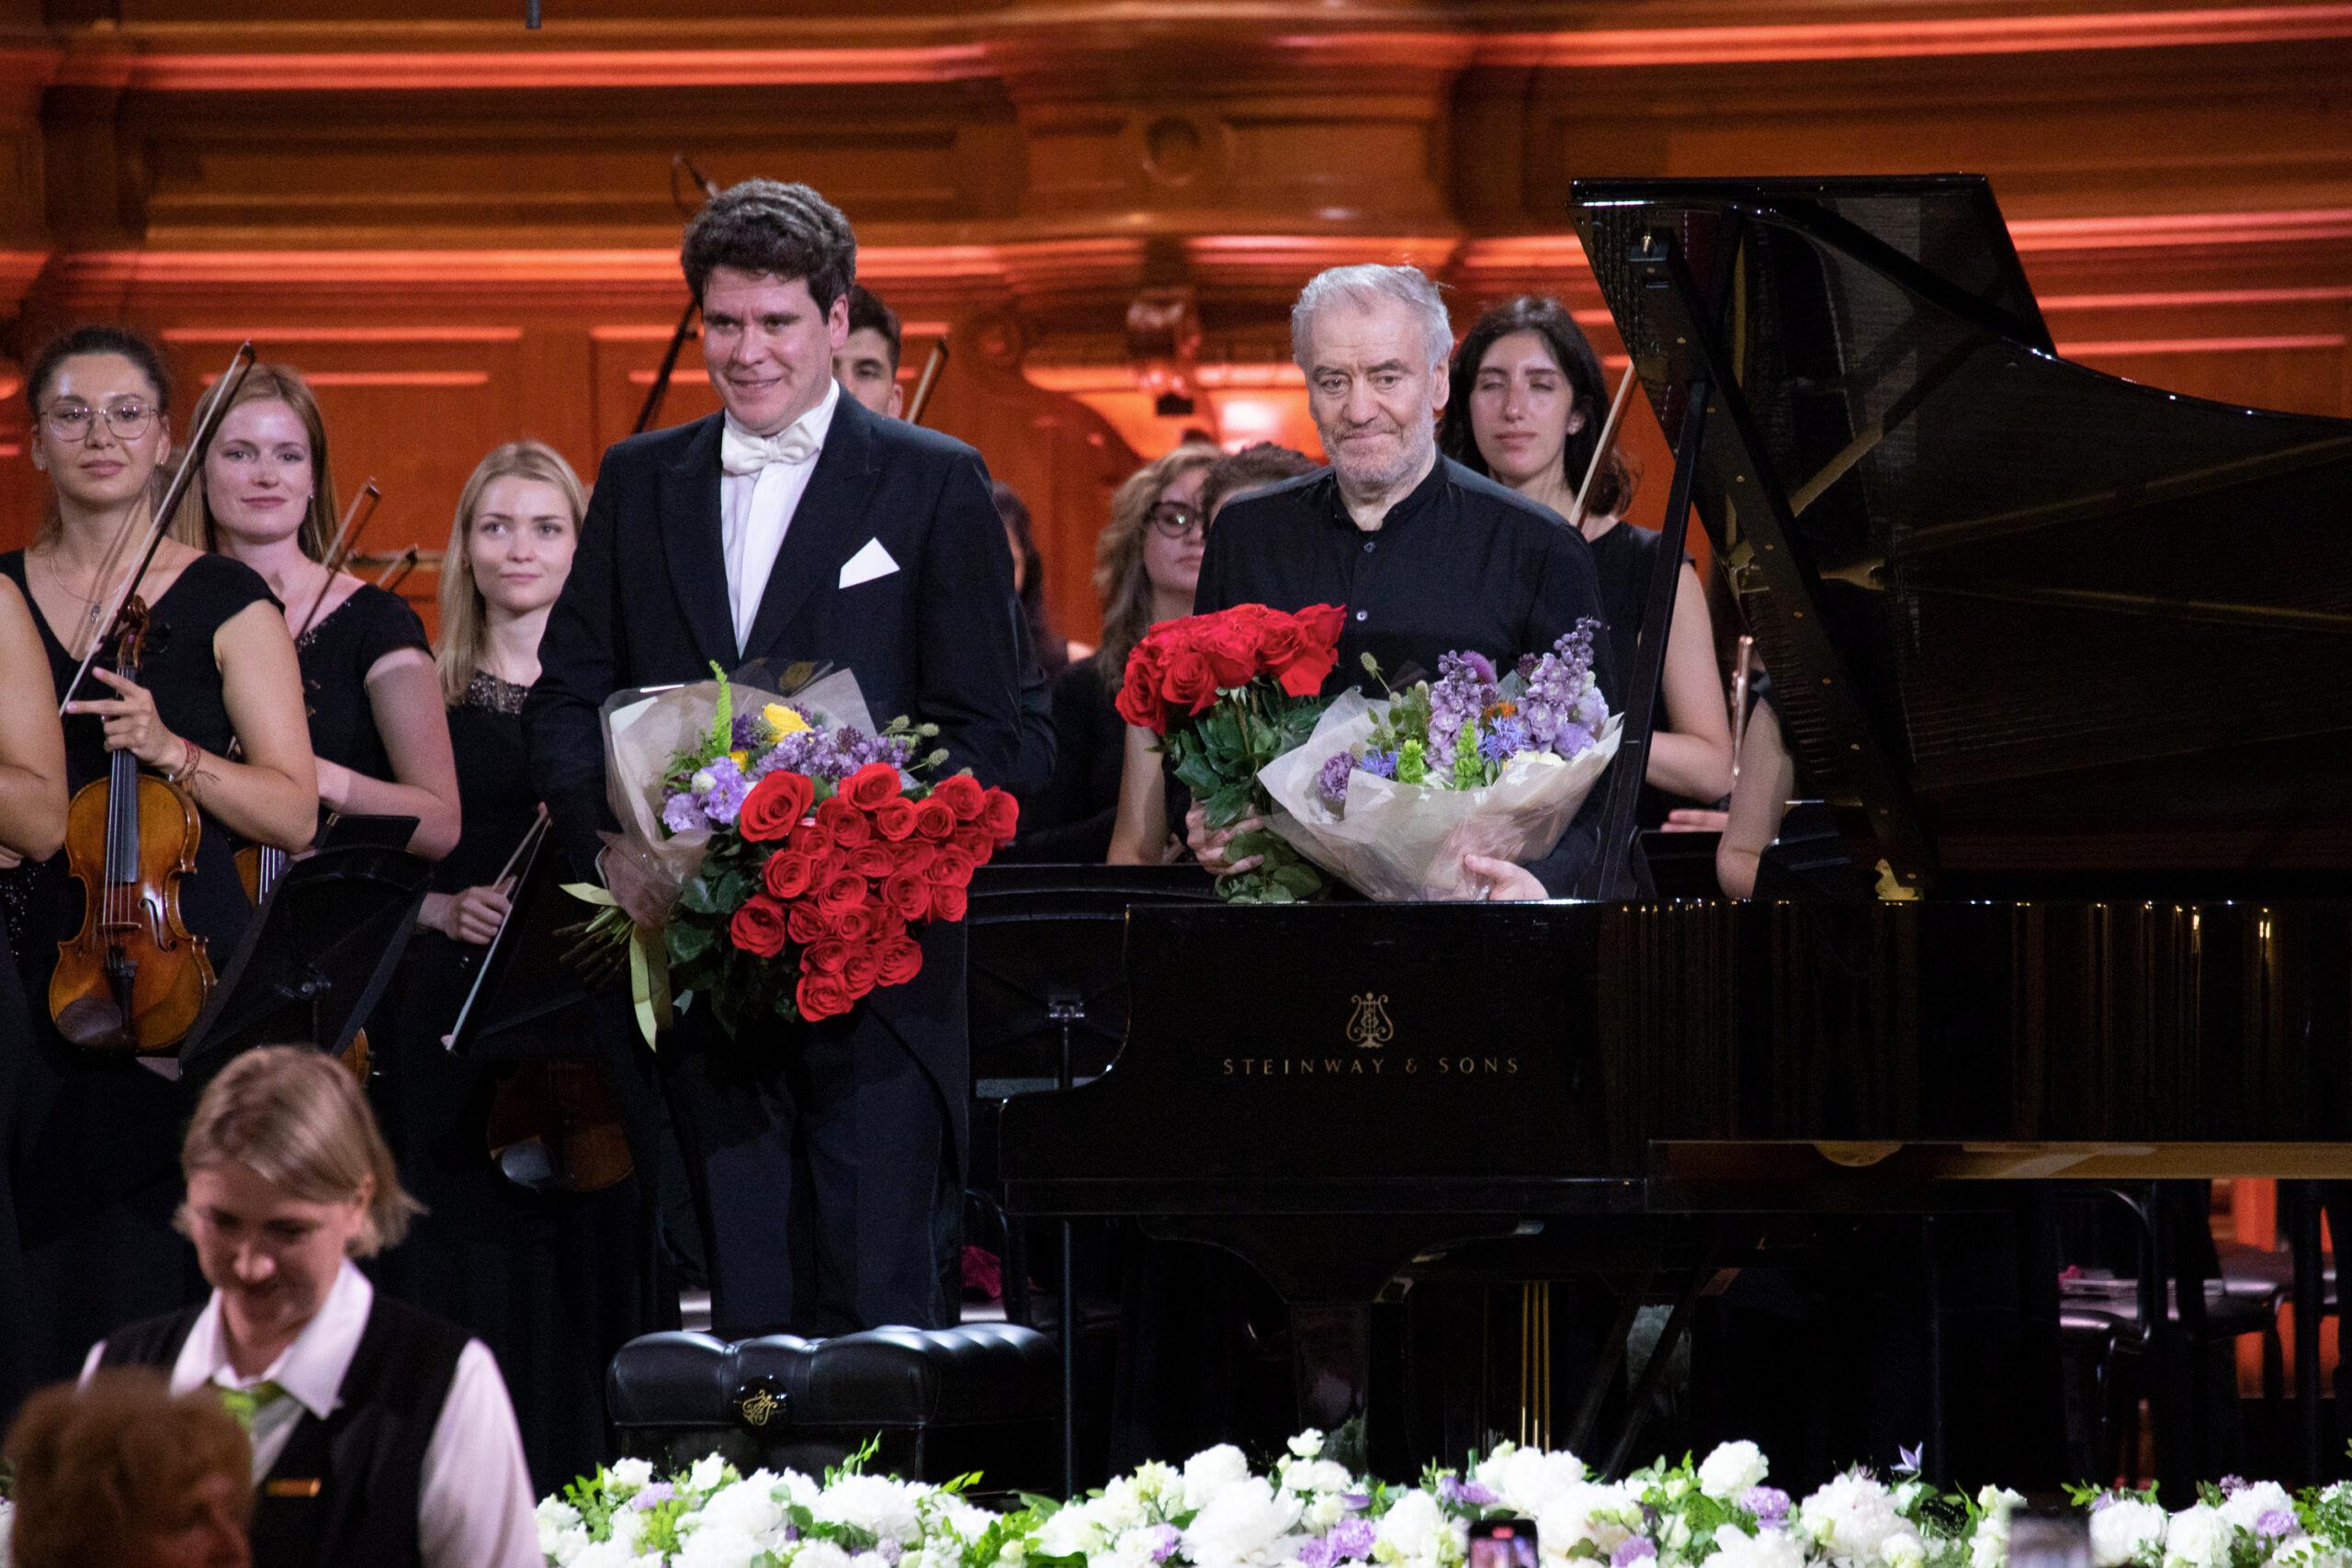 Valery Gergiev, Denis Matsuev and Alexander Tchaikovsky present the laureates of the Rachmaninoff International Competition at the Music Festival Brass of the White Nights in St. Petersburg